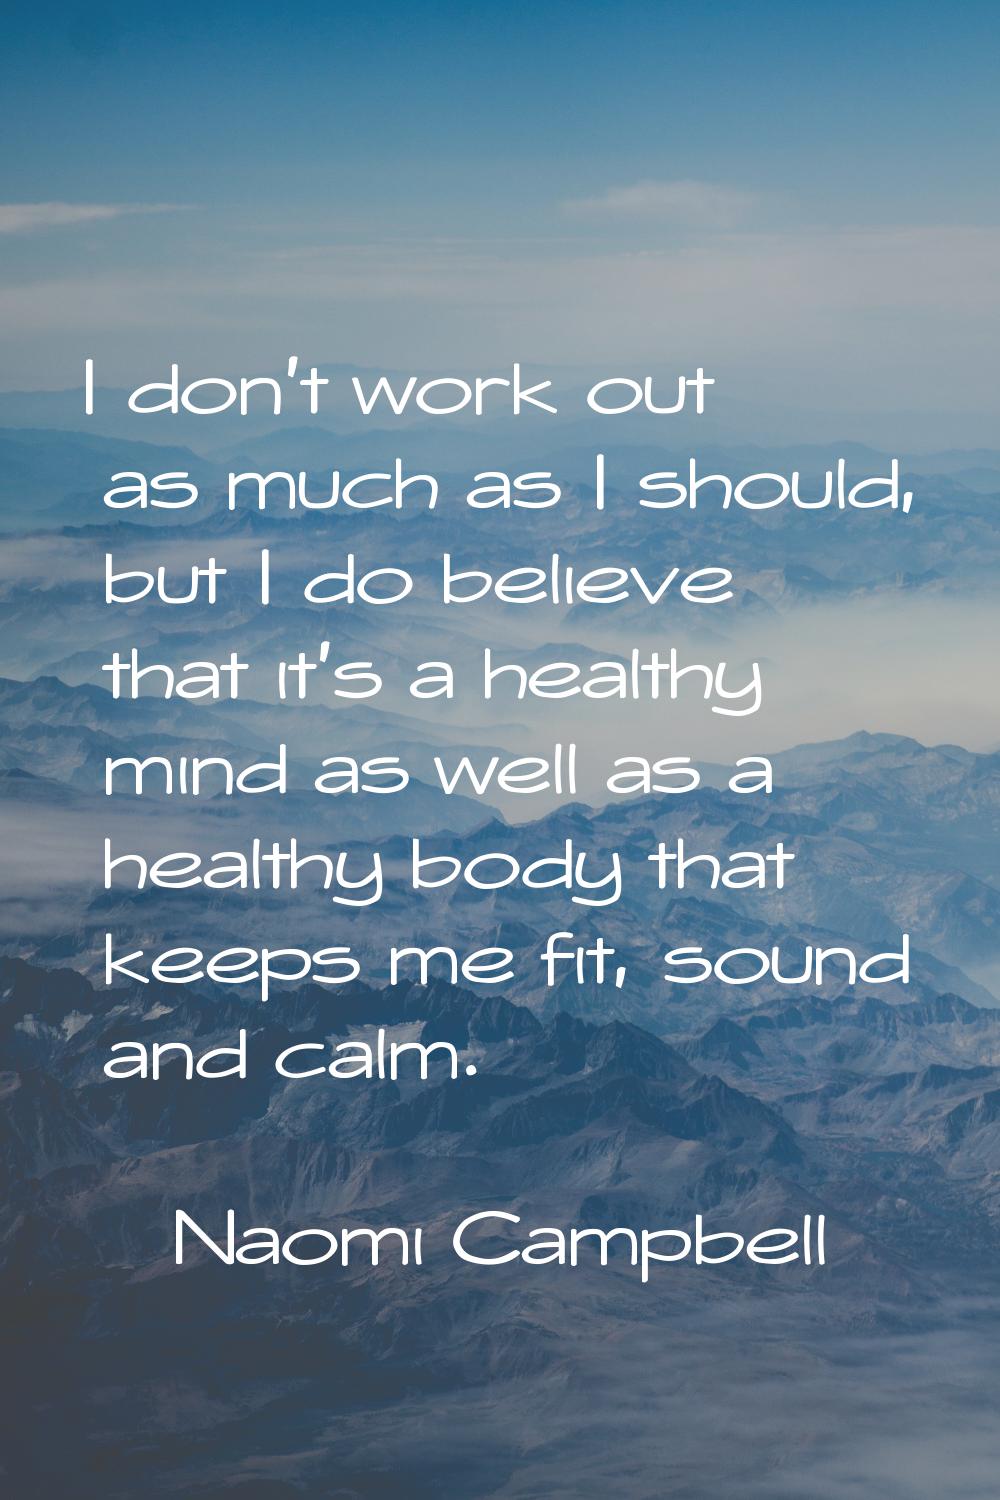 I don't work out as much as I should, but I do believe that it's a healthy mind as well as a health